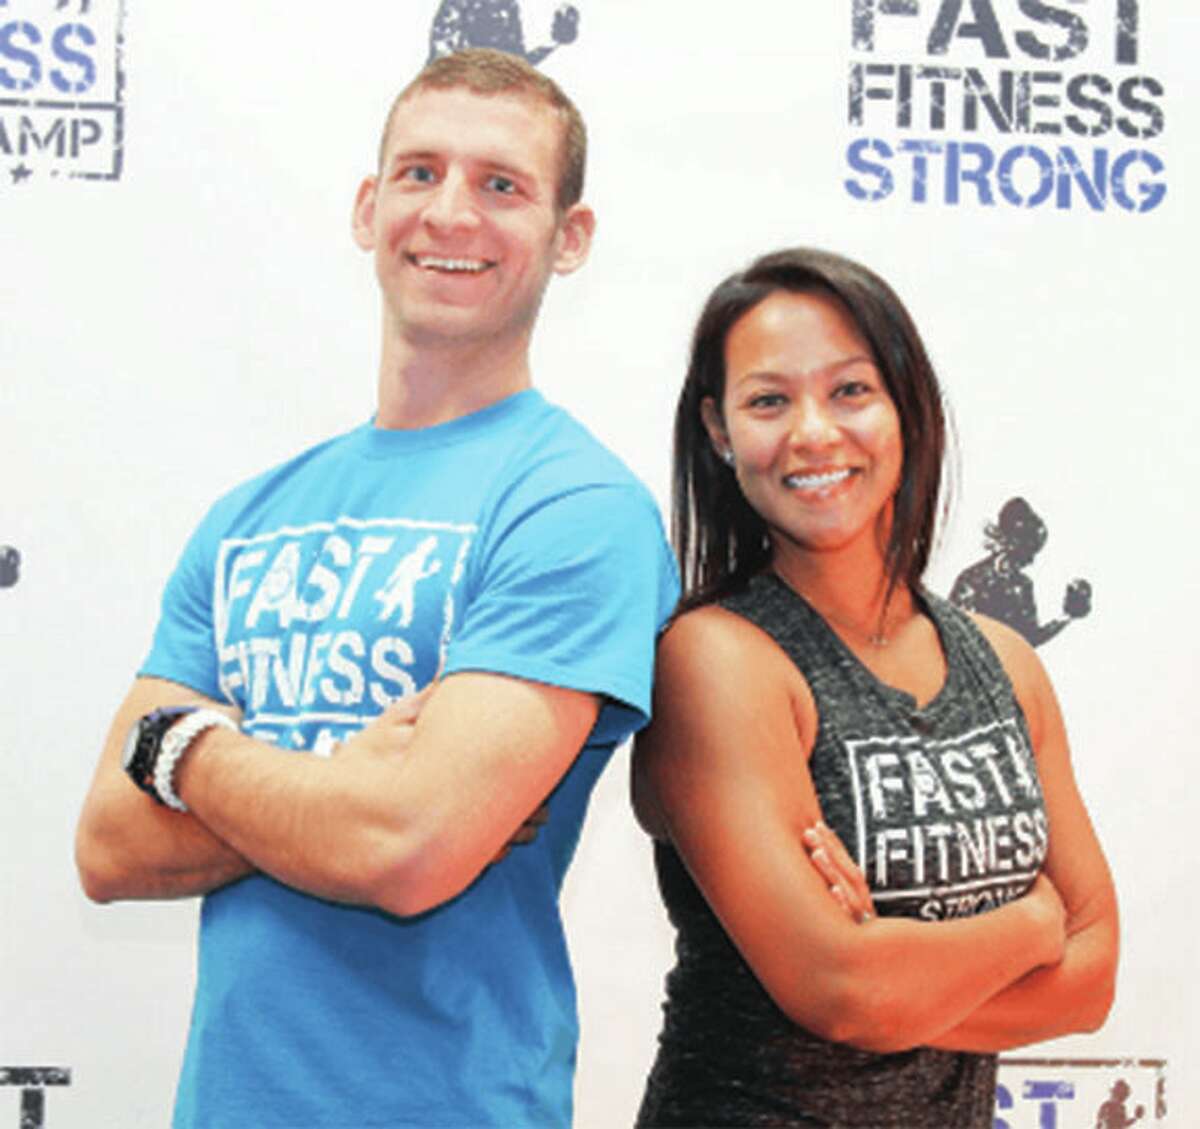 Chad and Val Skinner, owners of Fast Fitness Boot Camp, have now added a third location in Waterloo.